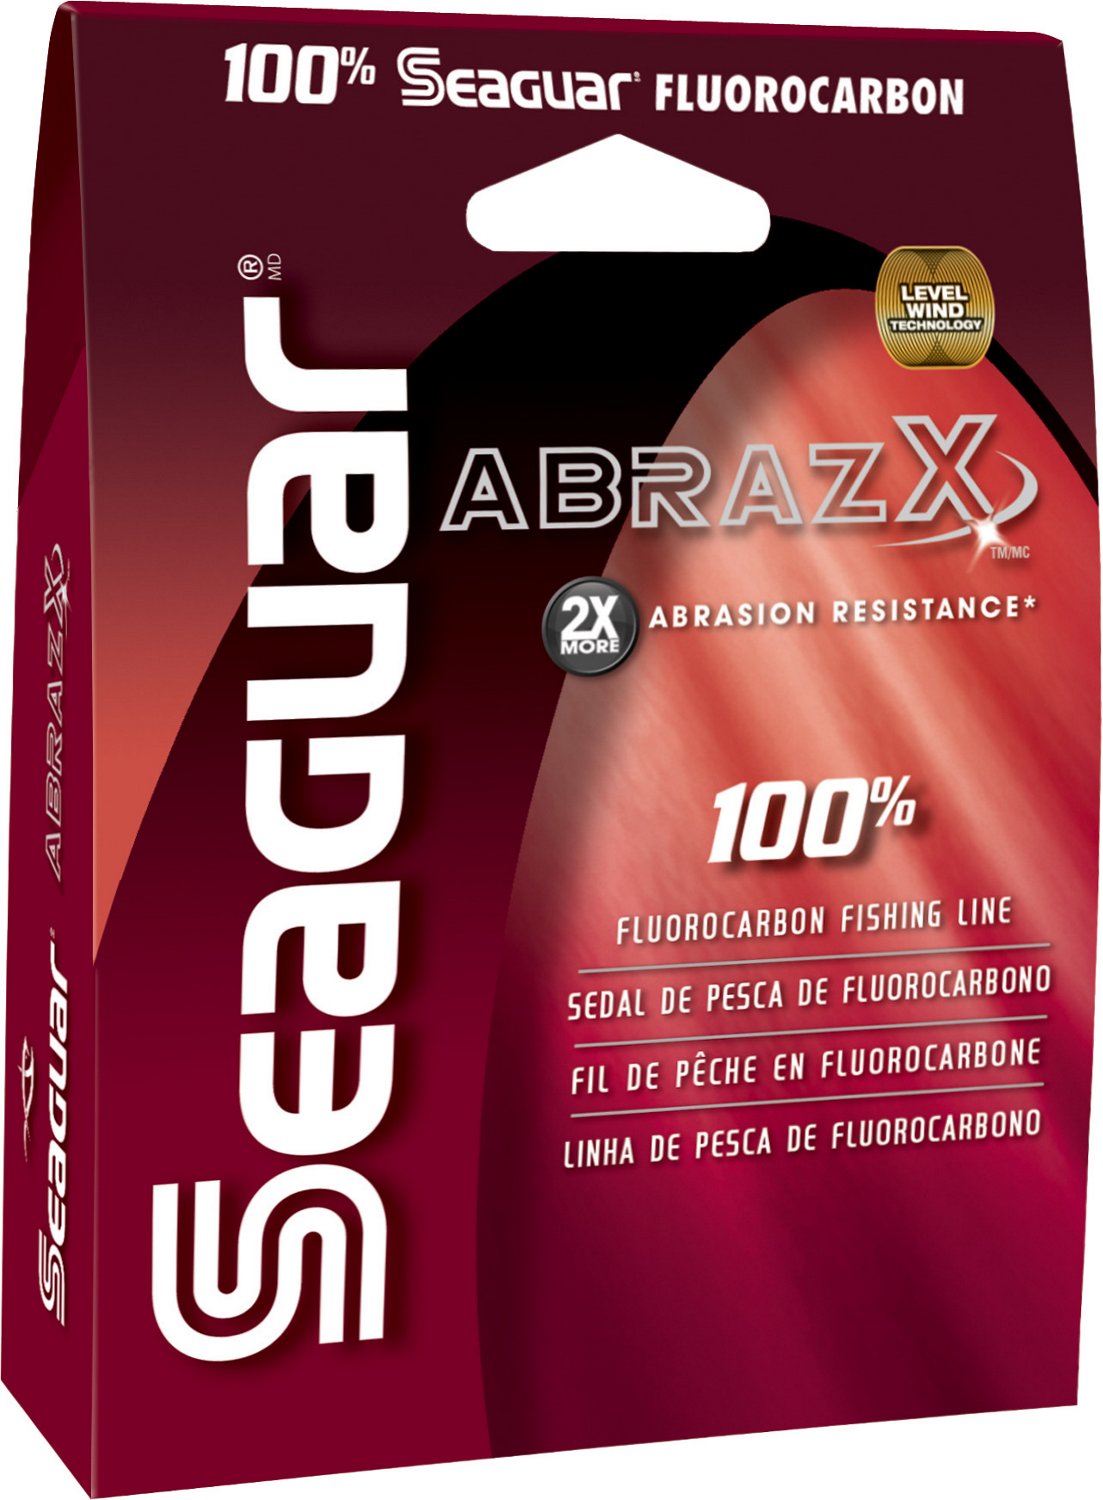 Seaguar Abrazx 200 yards Fluorocarbon Fishing Line